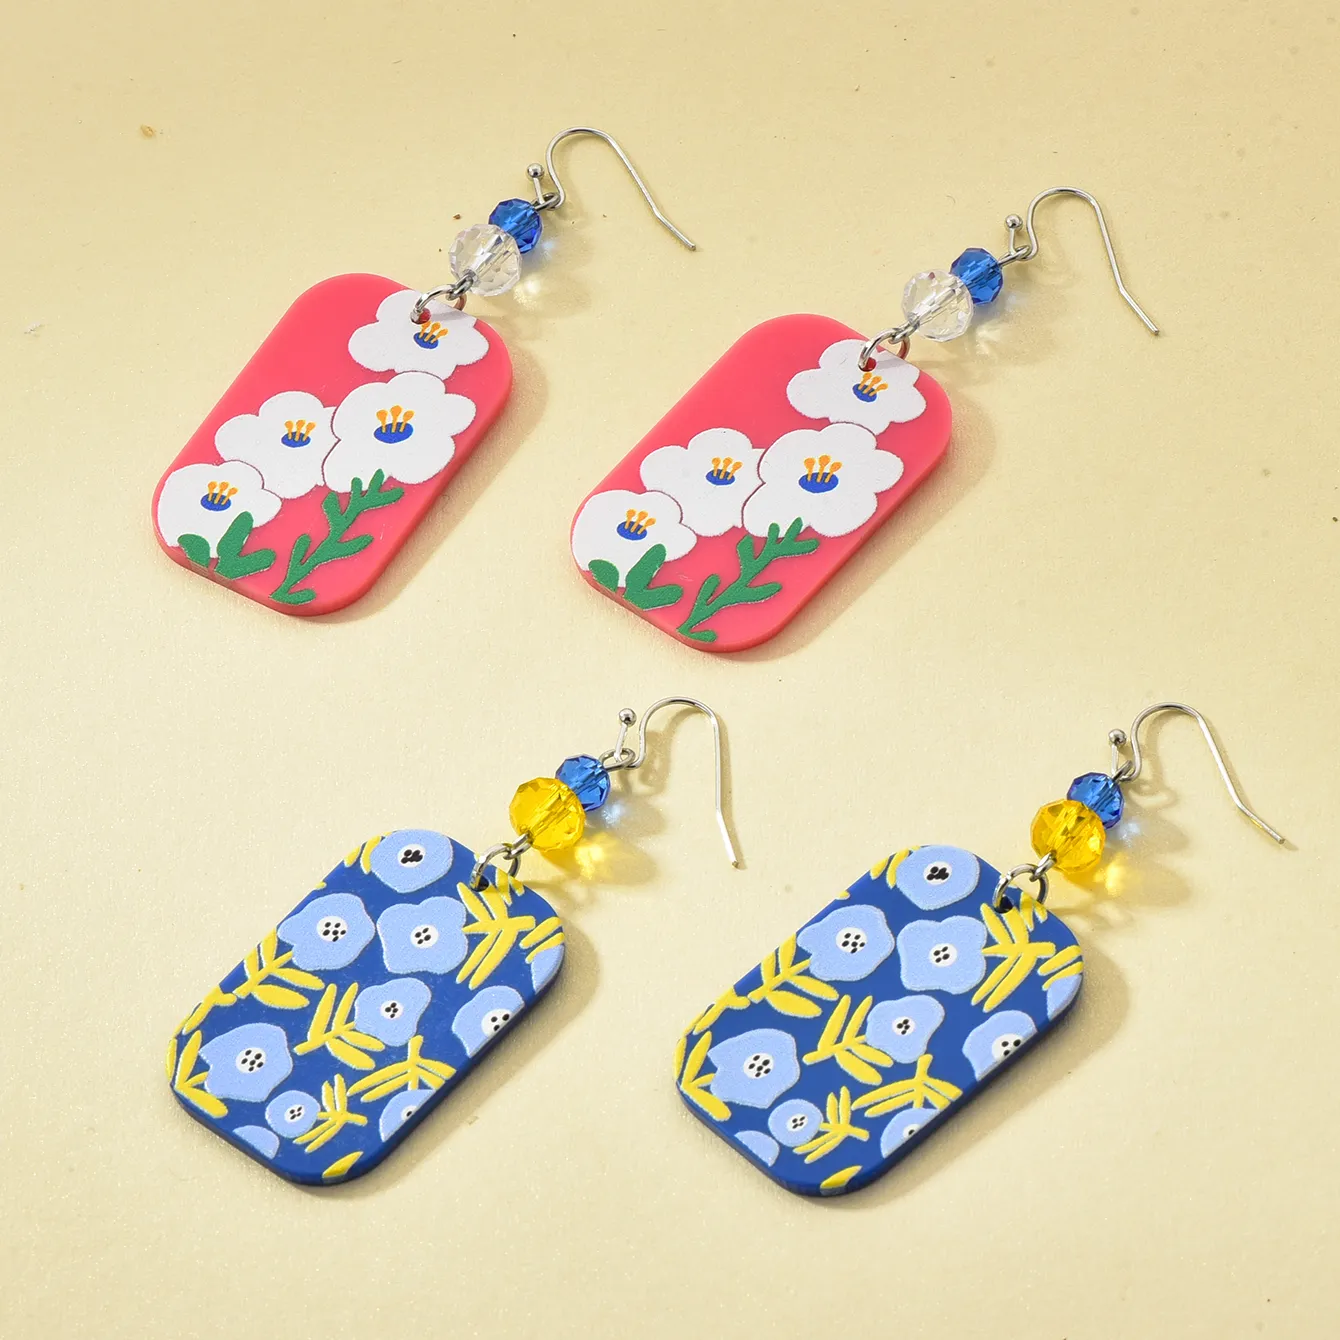 XINMAN wholesale fashion retro jewelry new arrival fancy acrylic material pendant flower print crystal beads embellish earrings